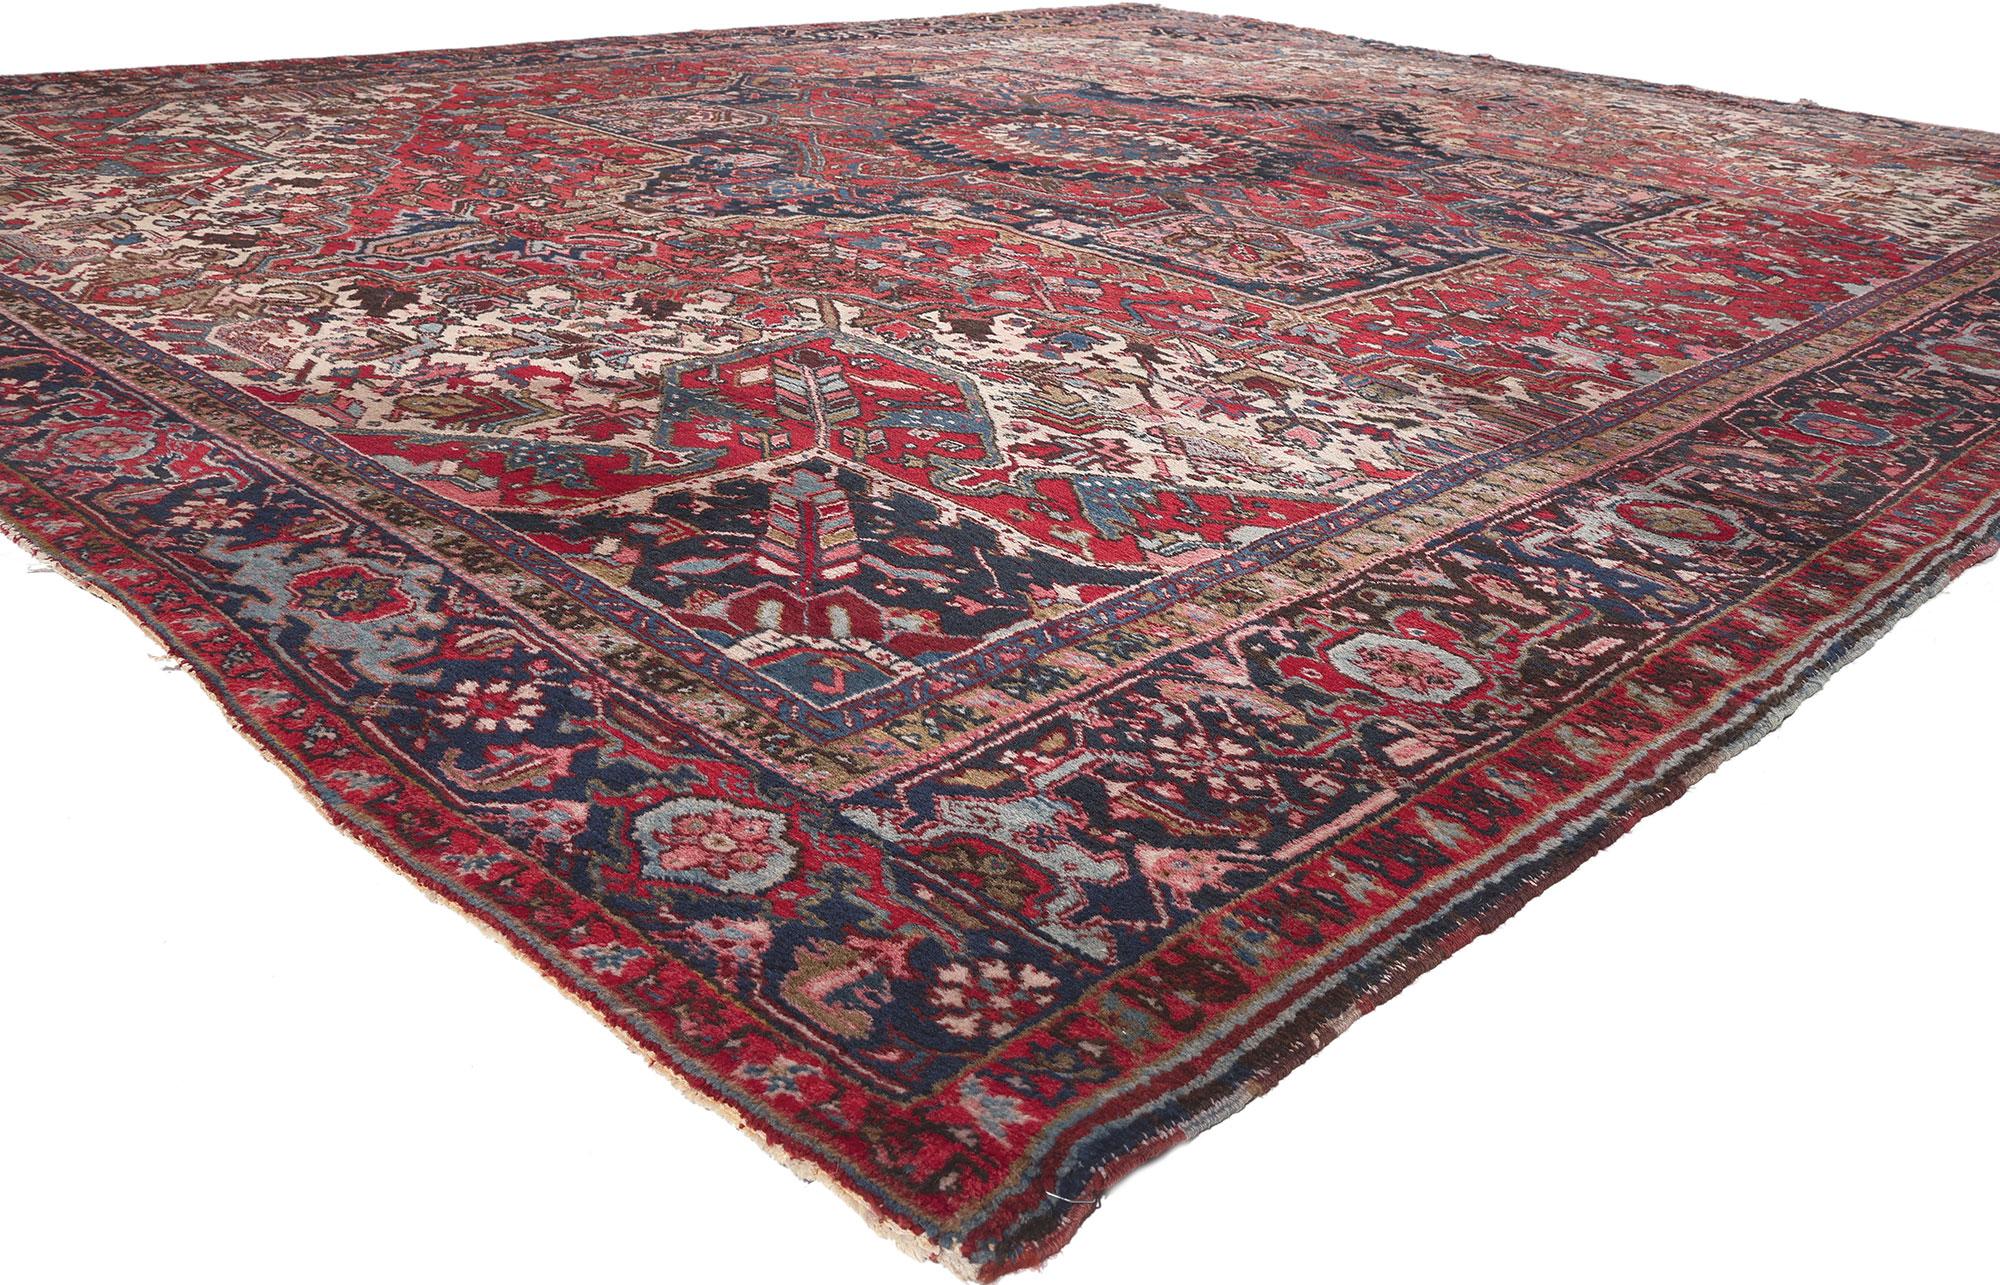 78540 Antique Persian Heriz Rug, 11'09 x 14'07. 
Effortlessly chic and versatile with grandeur style and texture, this antique Persian Heriz rug charms with ease. The distinctive geometric design and refined color palette woven into this piece work